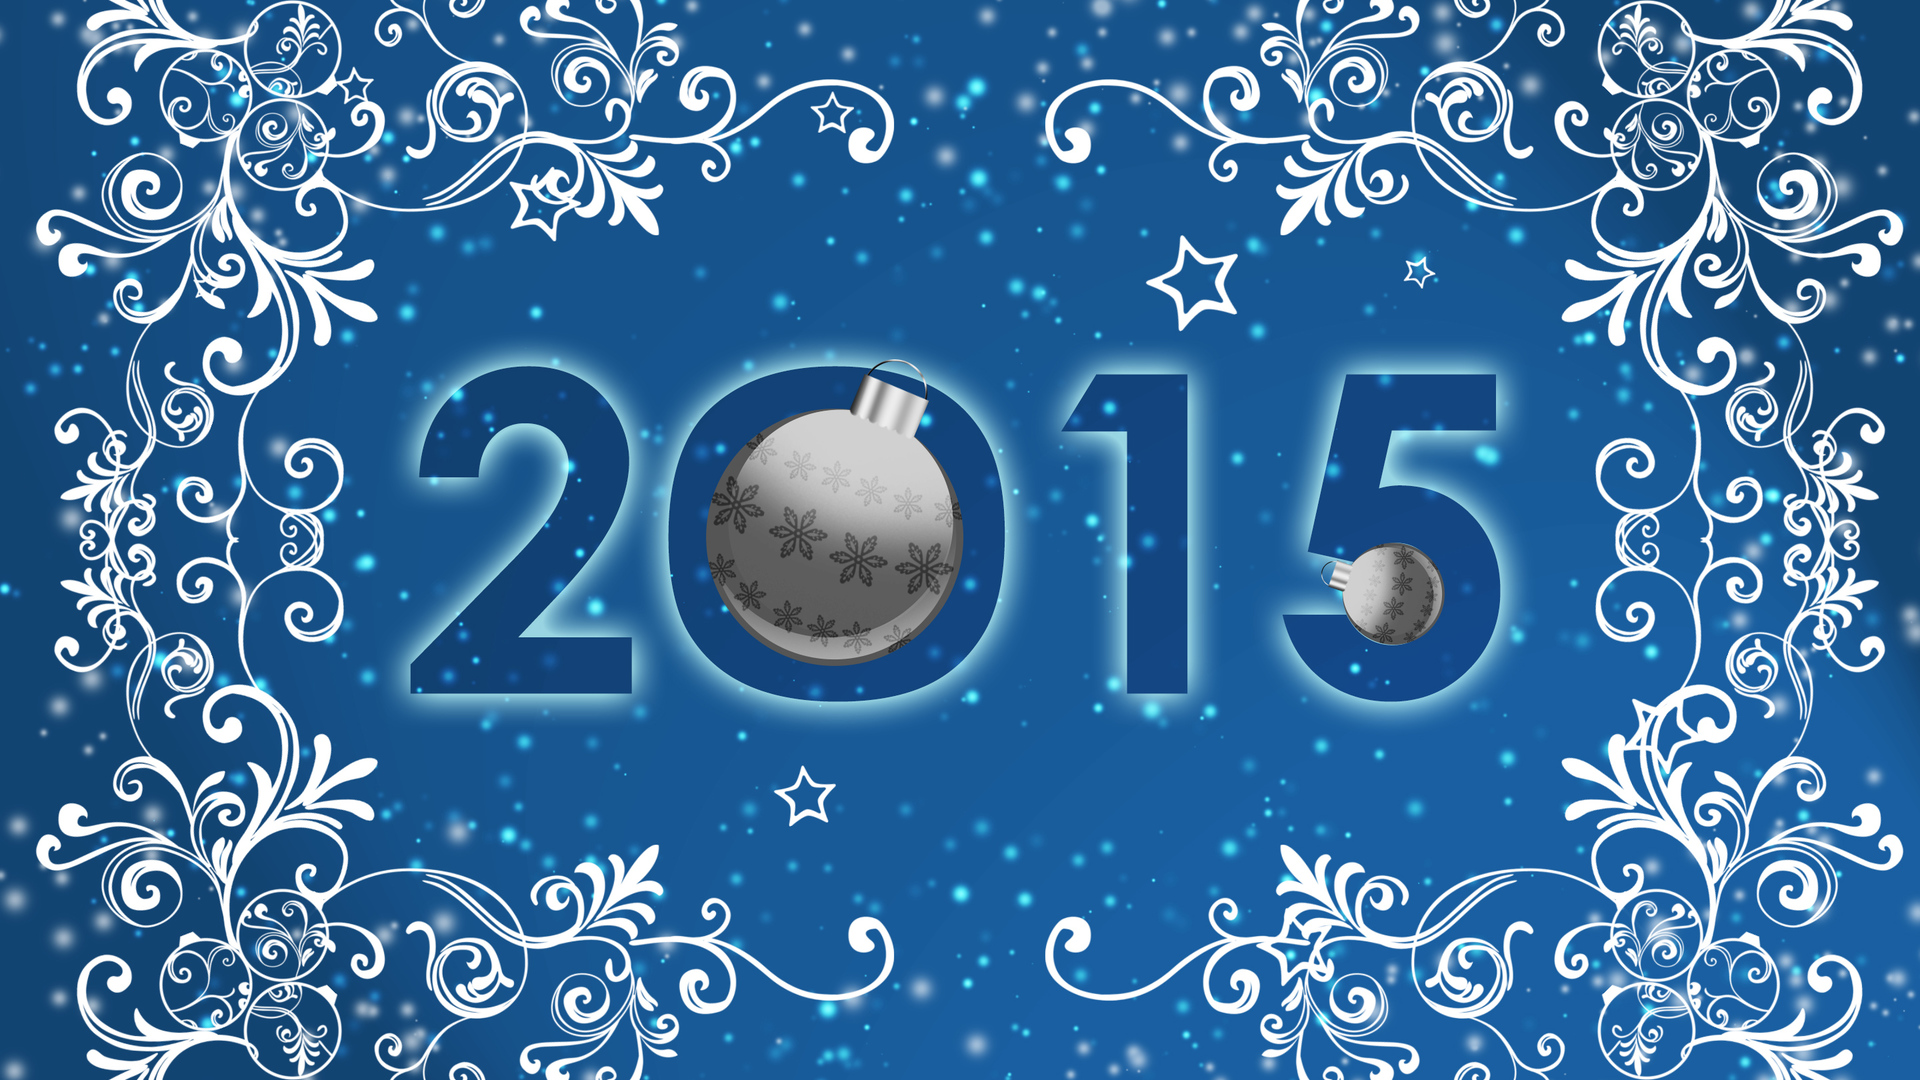 Happy New Year & Christmas HD Wallpapers